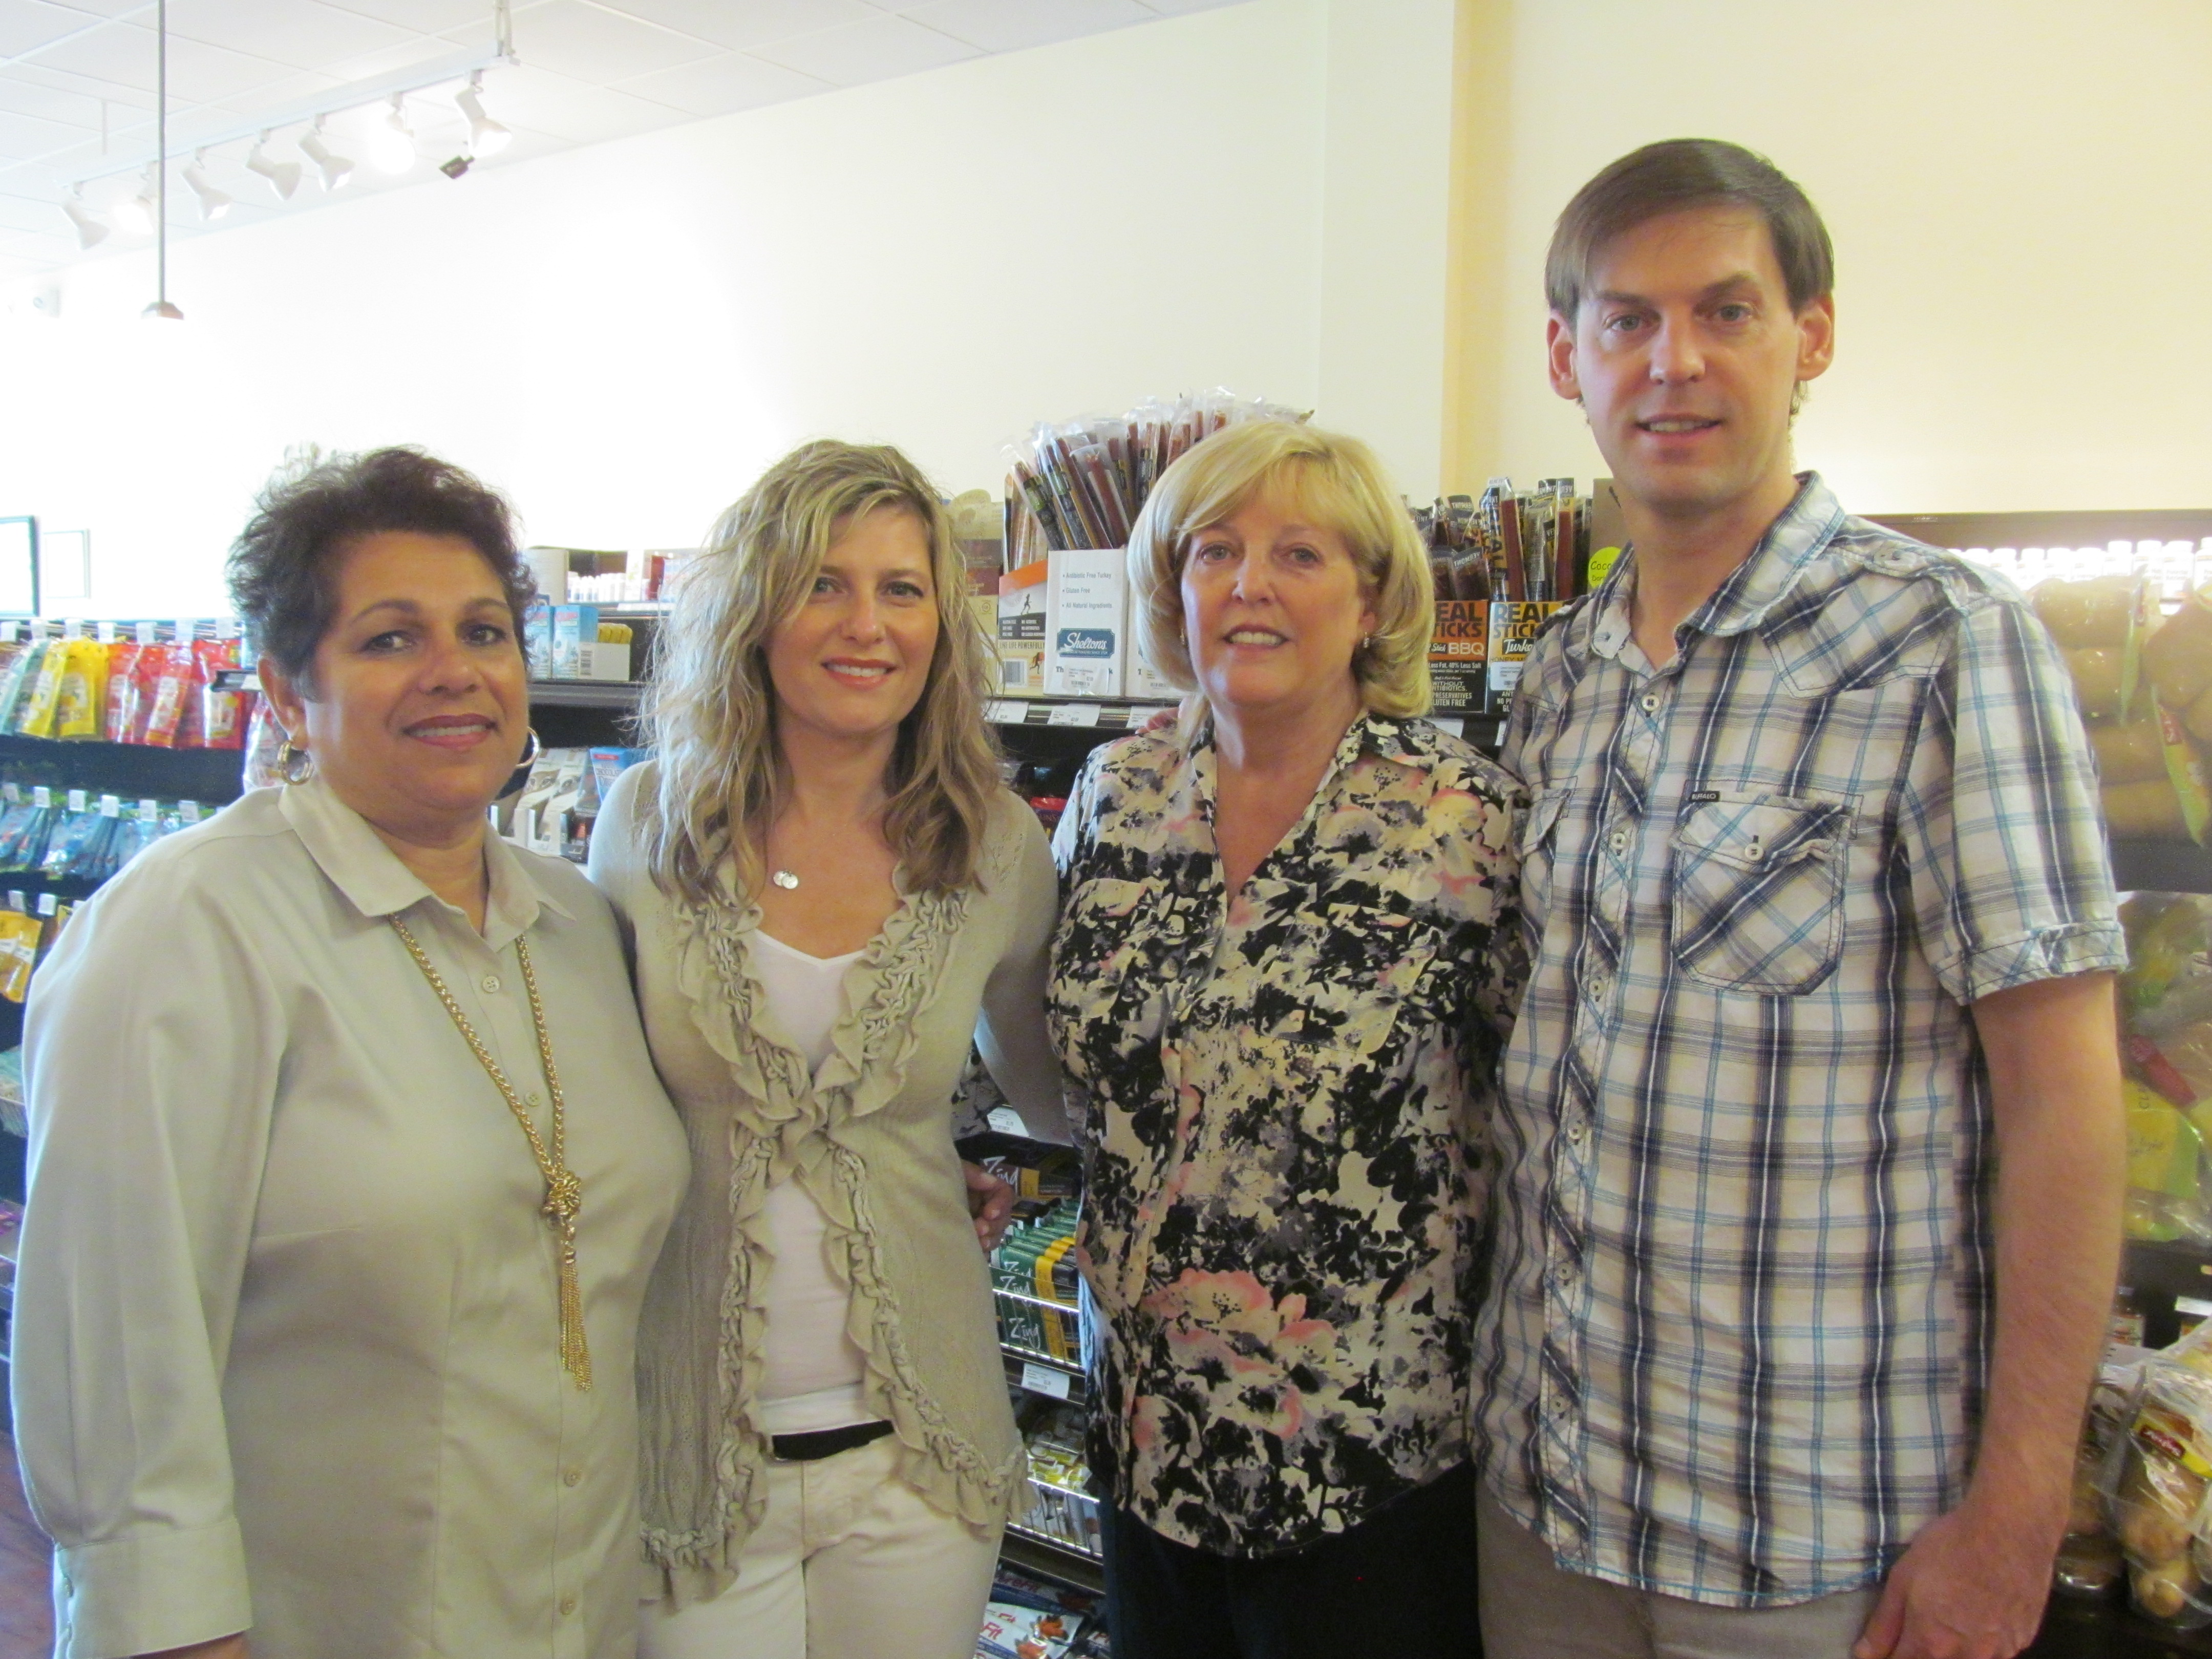 Pictured: Flo Sonneveld, Diana Sourek, Barbara Griffin and Jason Hartrampf.